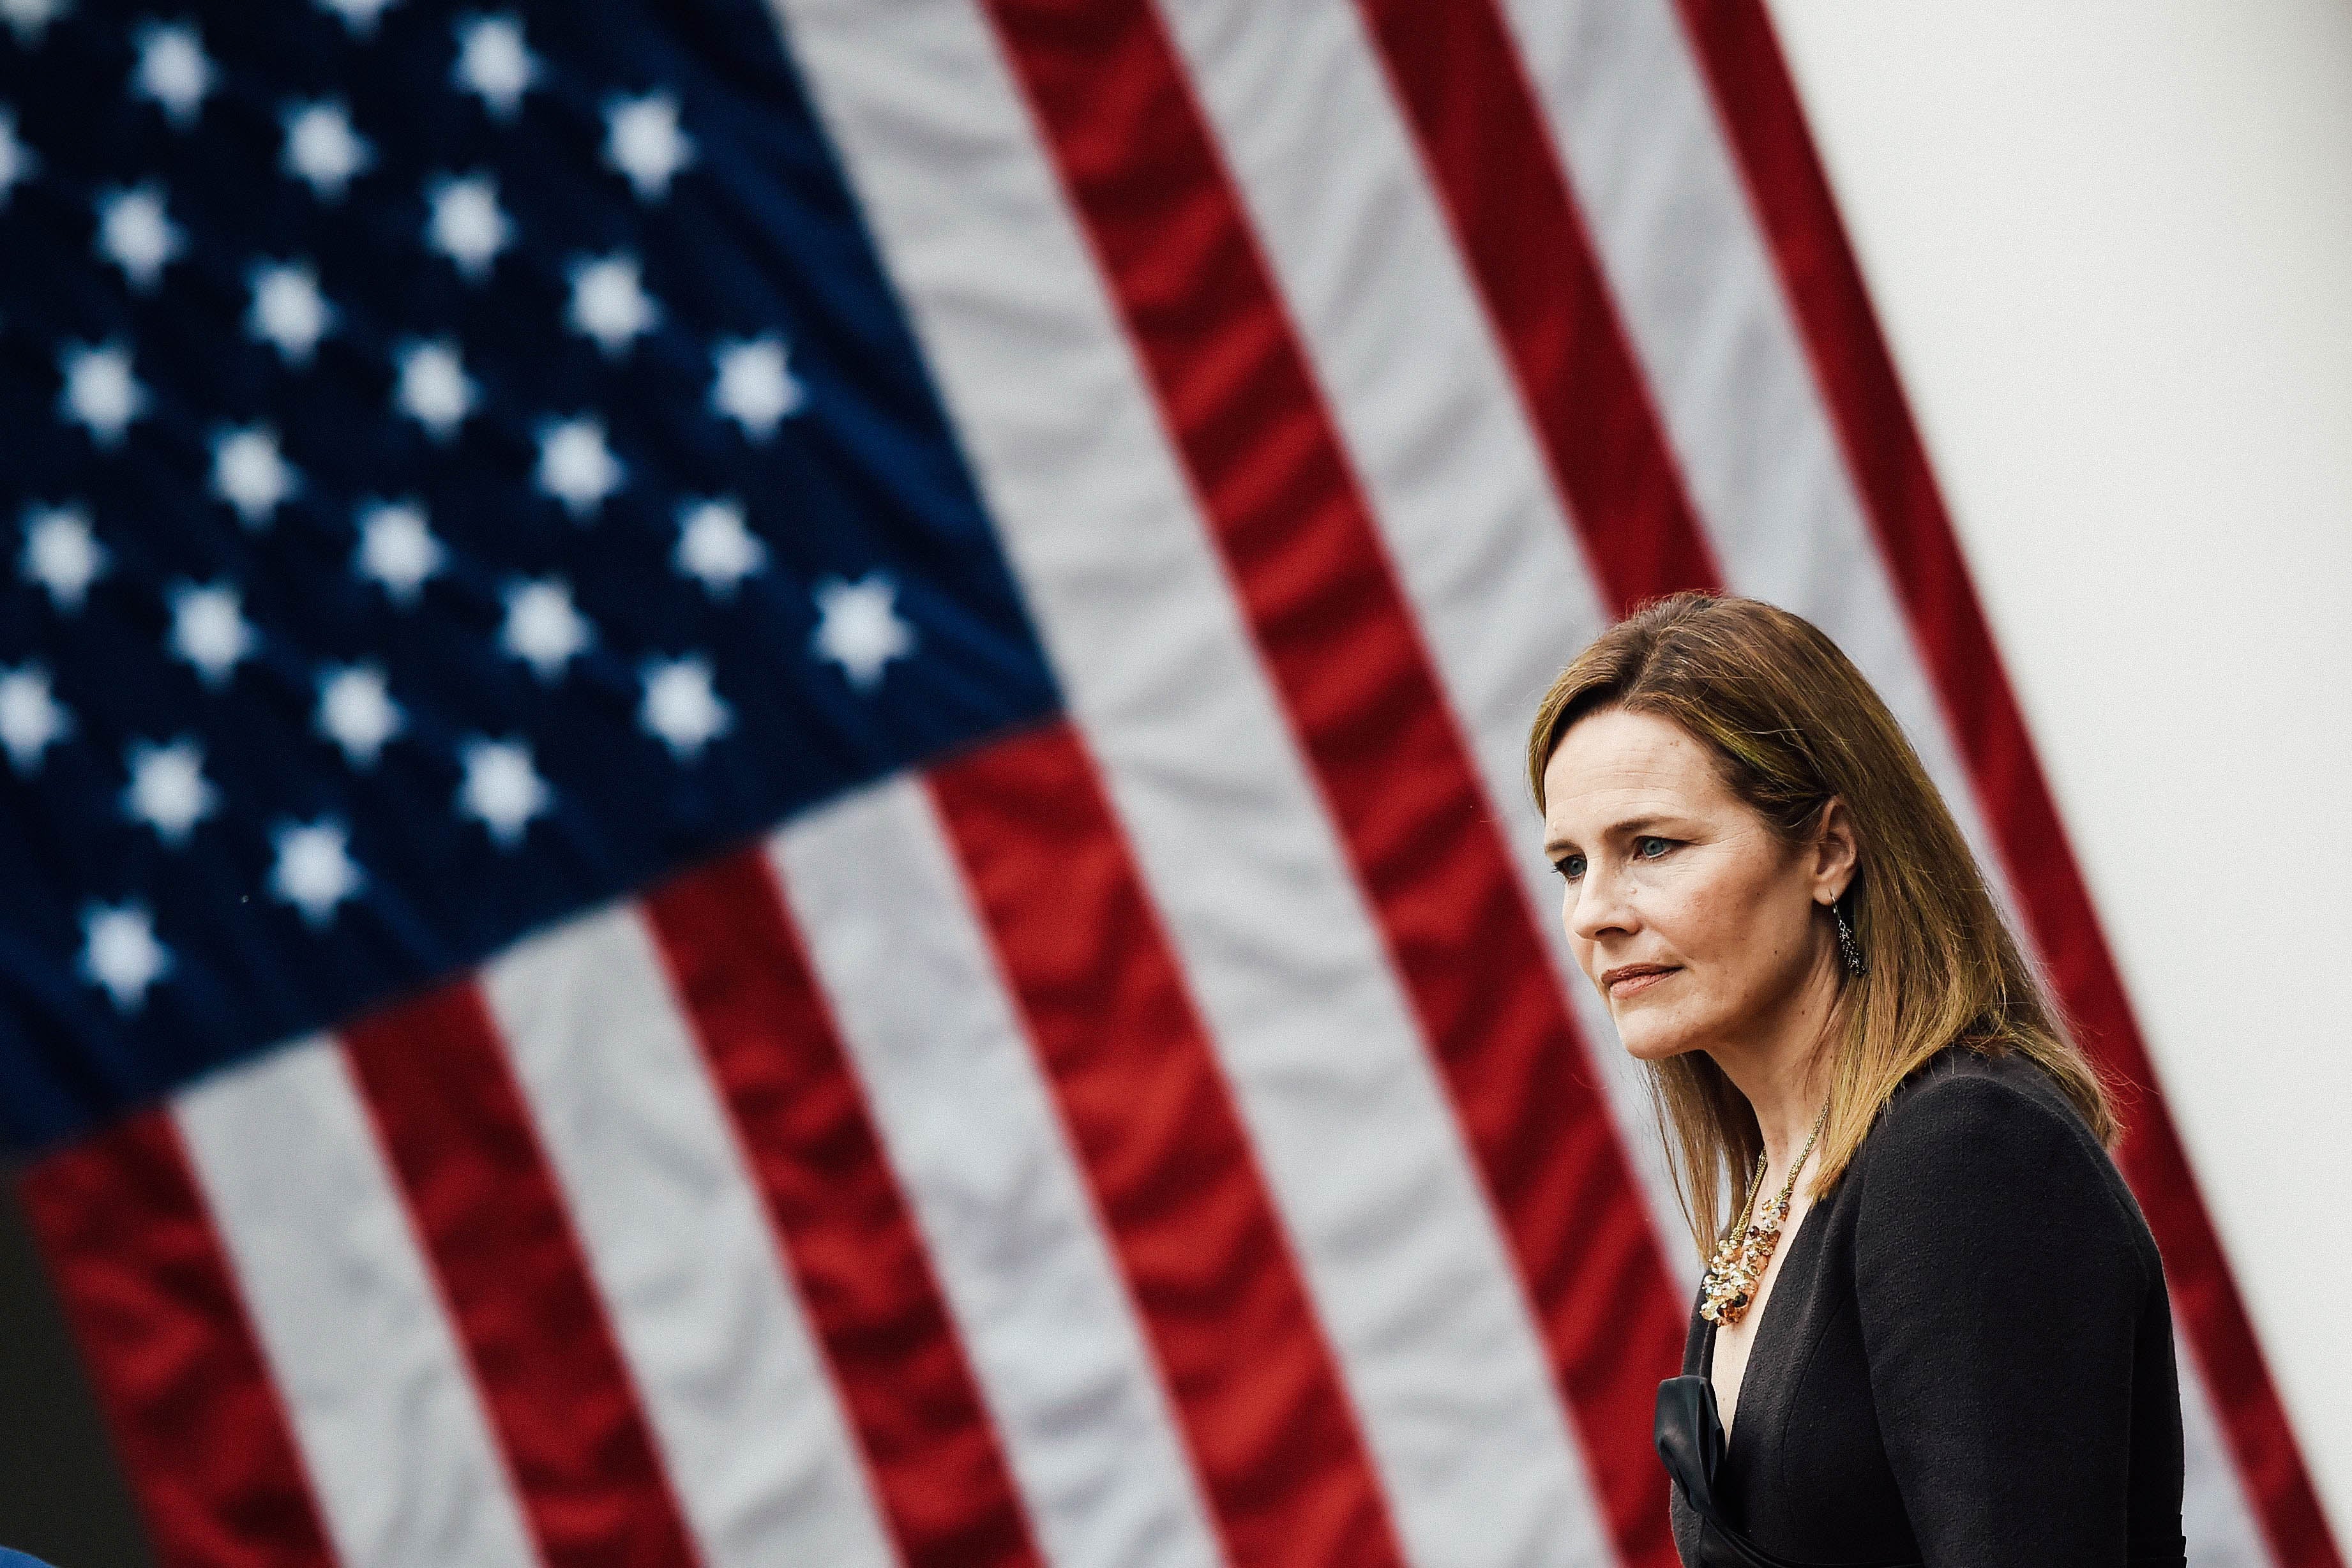 Amy Coney Barrett in profile in front of an American flag.